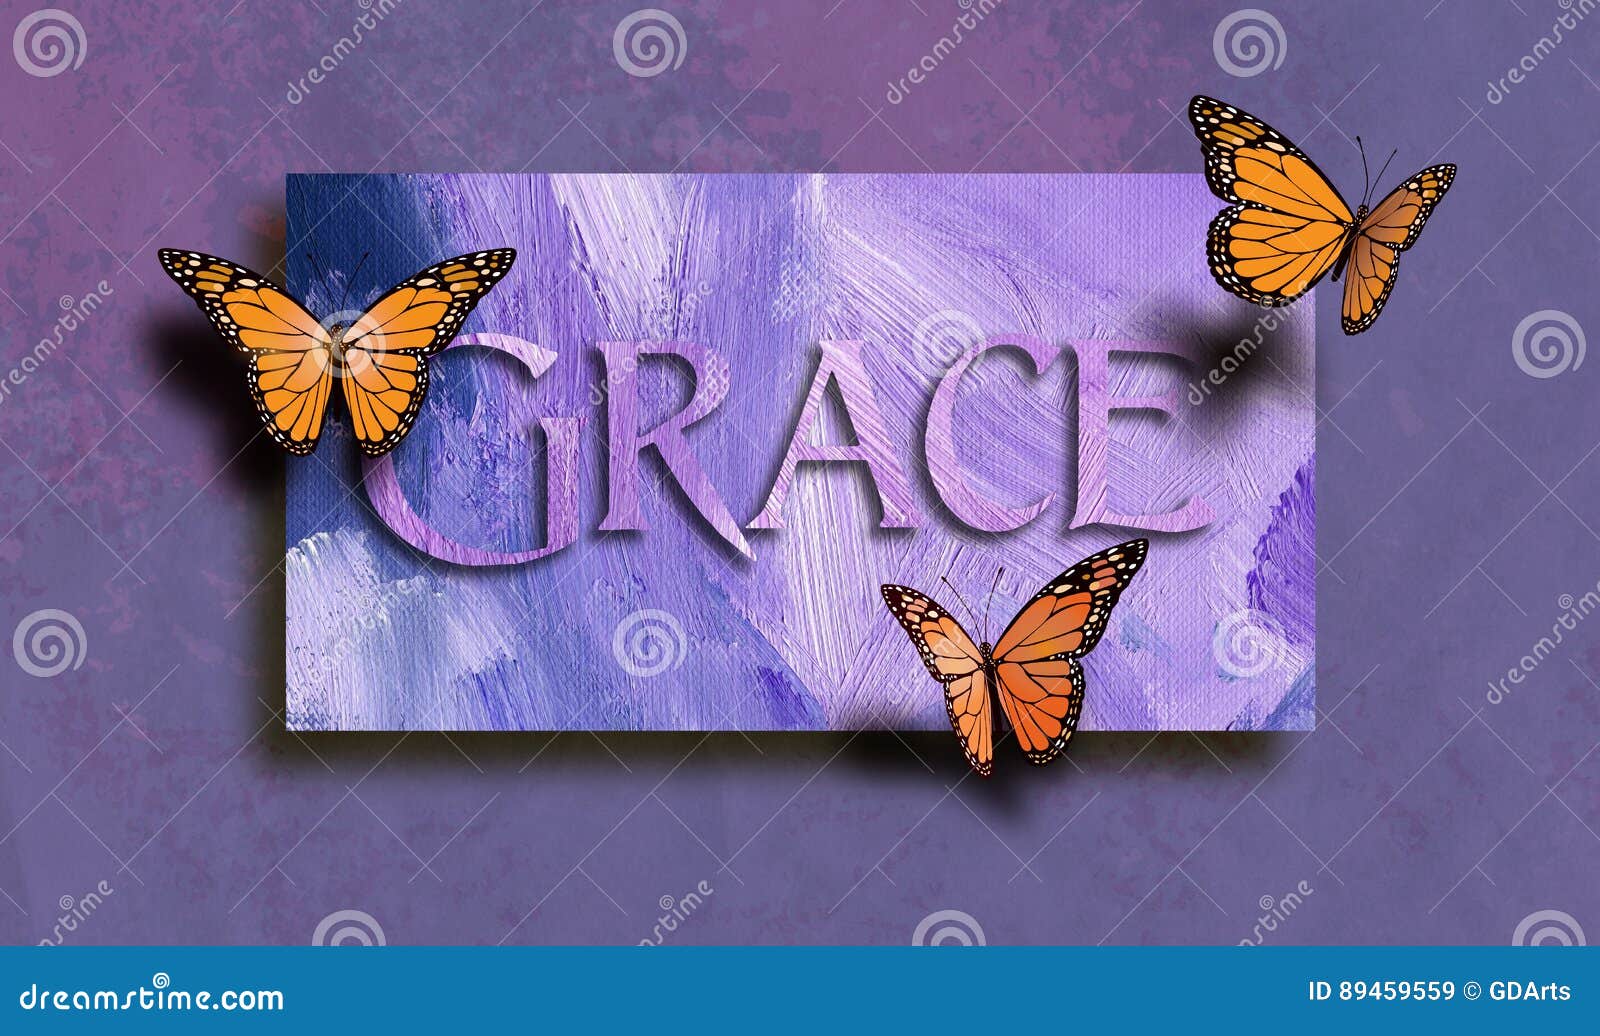 grace and free butterflies